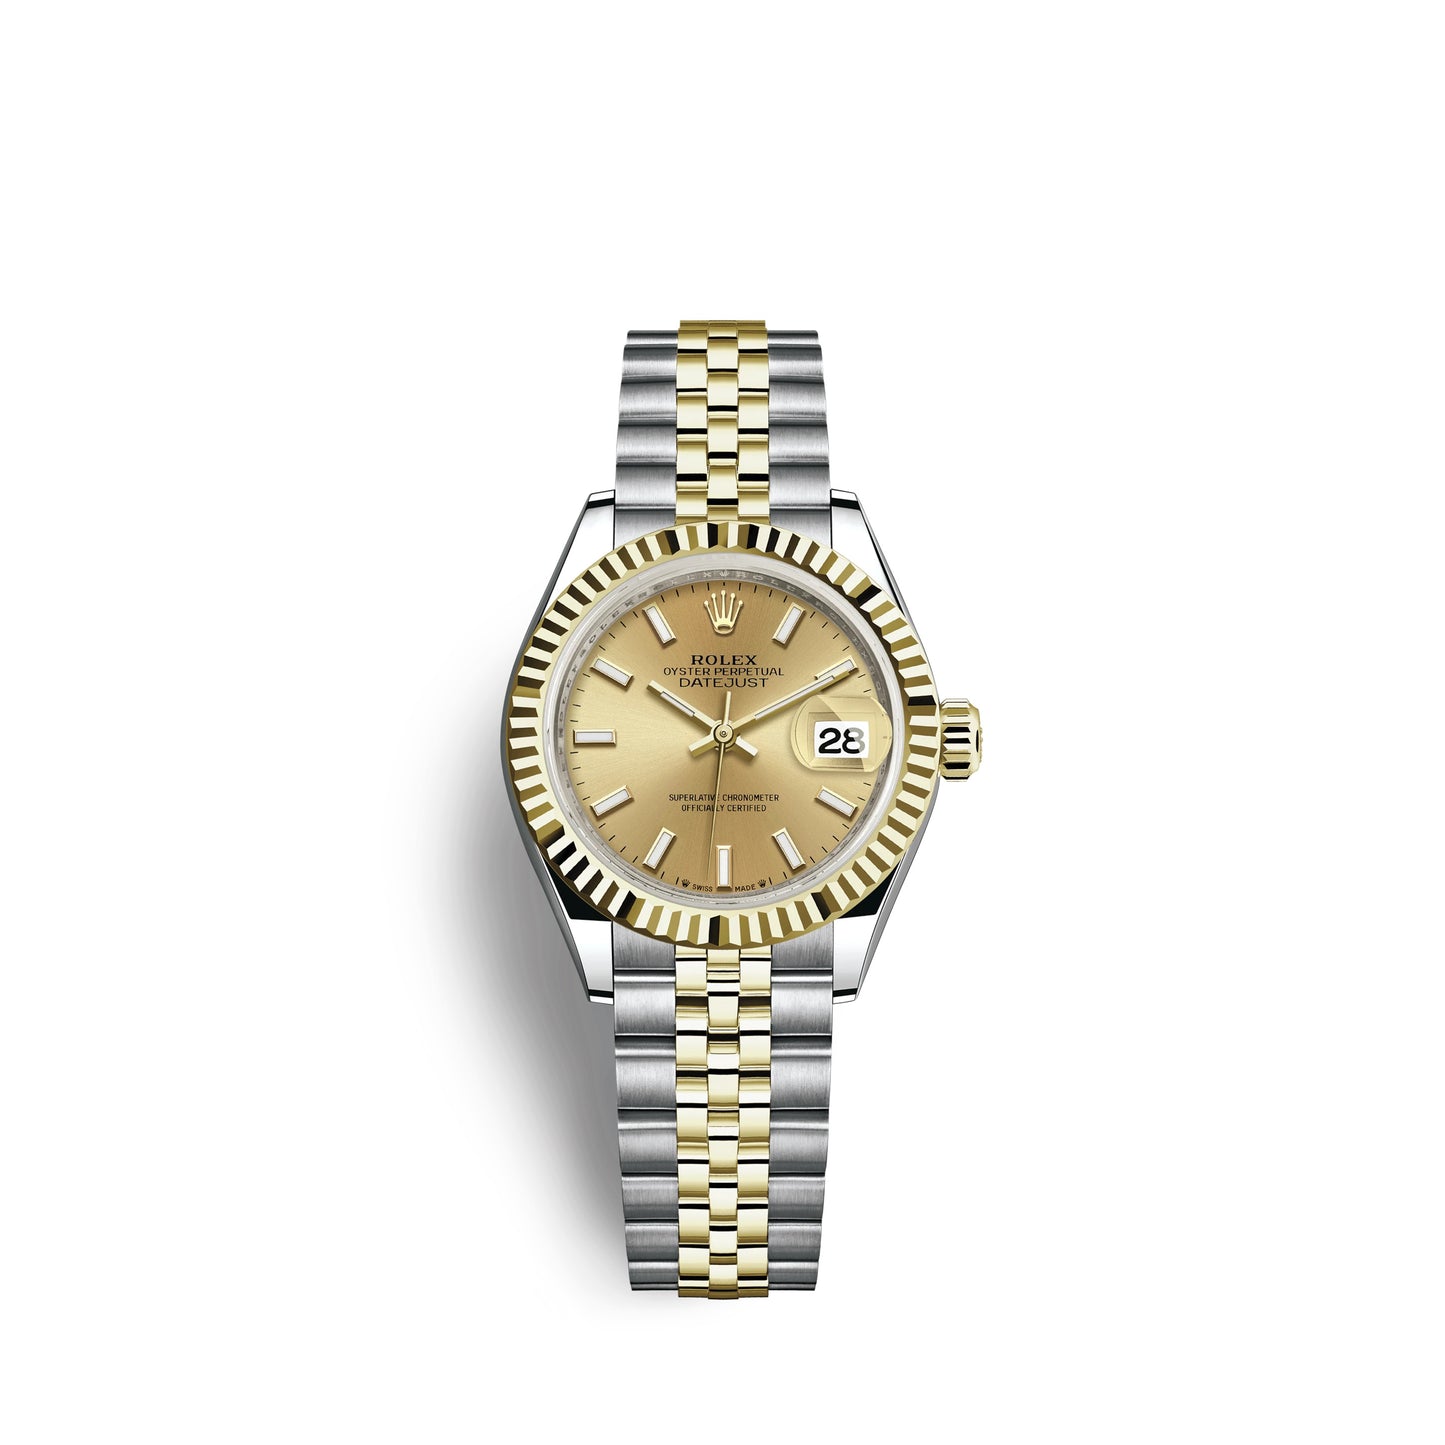 Rolex Lady-Datejust 28, Oystersteel and 18k Yellow Gold, Ref# 279173-0001